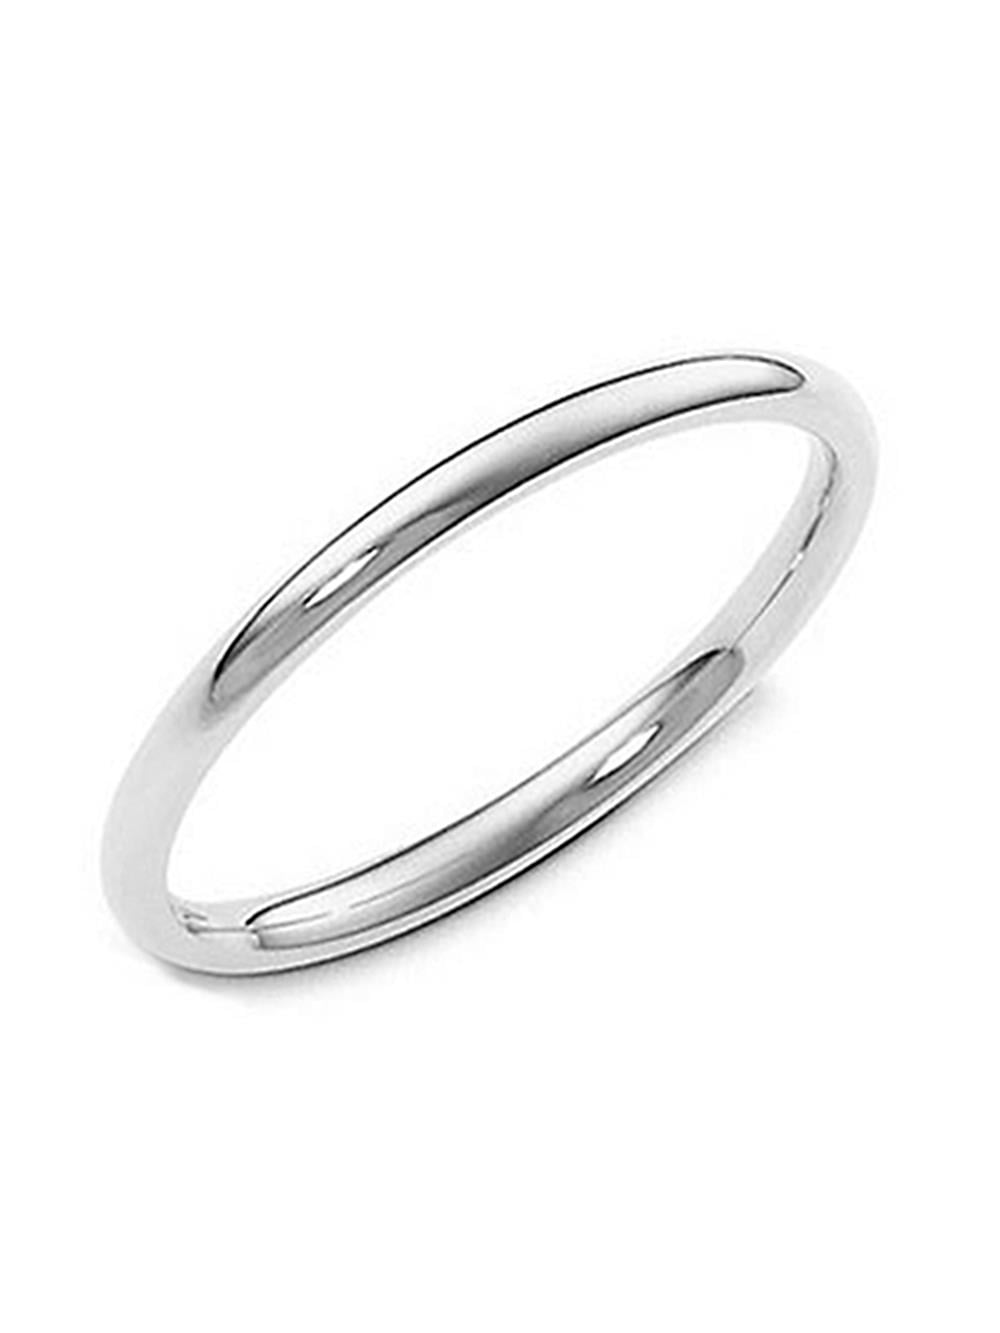 Plain Ring Genuine Solid Sterling Silver 925 Jewelry Face Height 5 mm Size 7